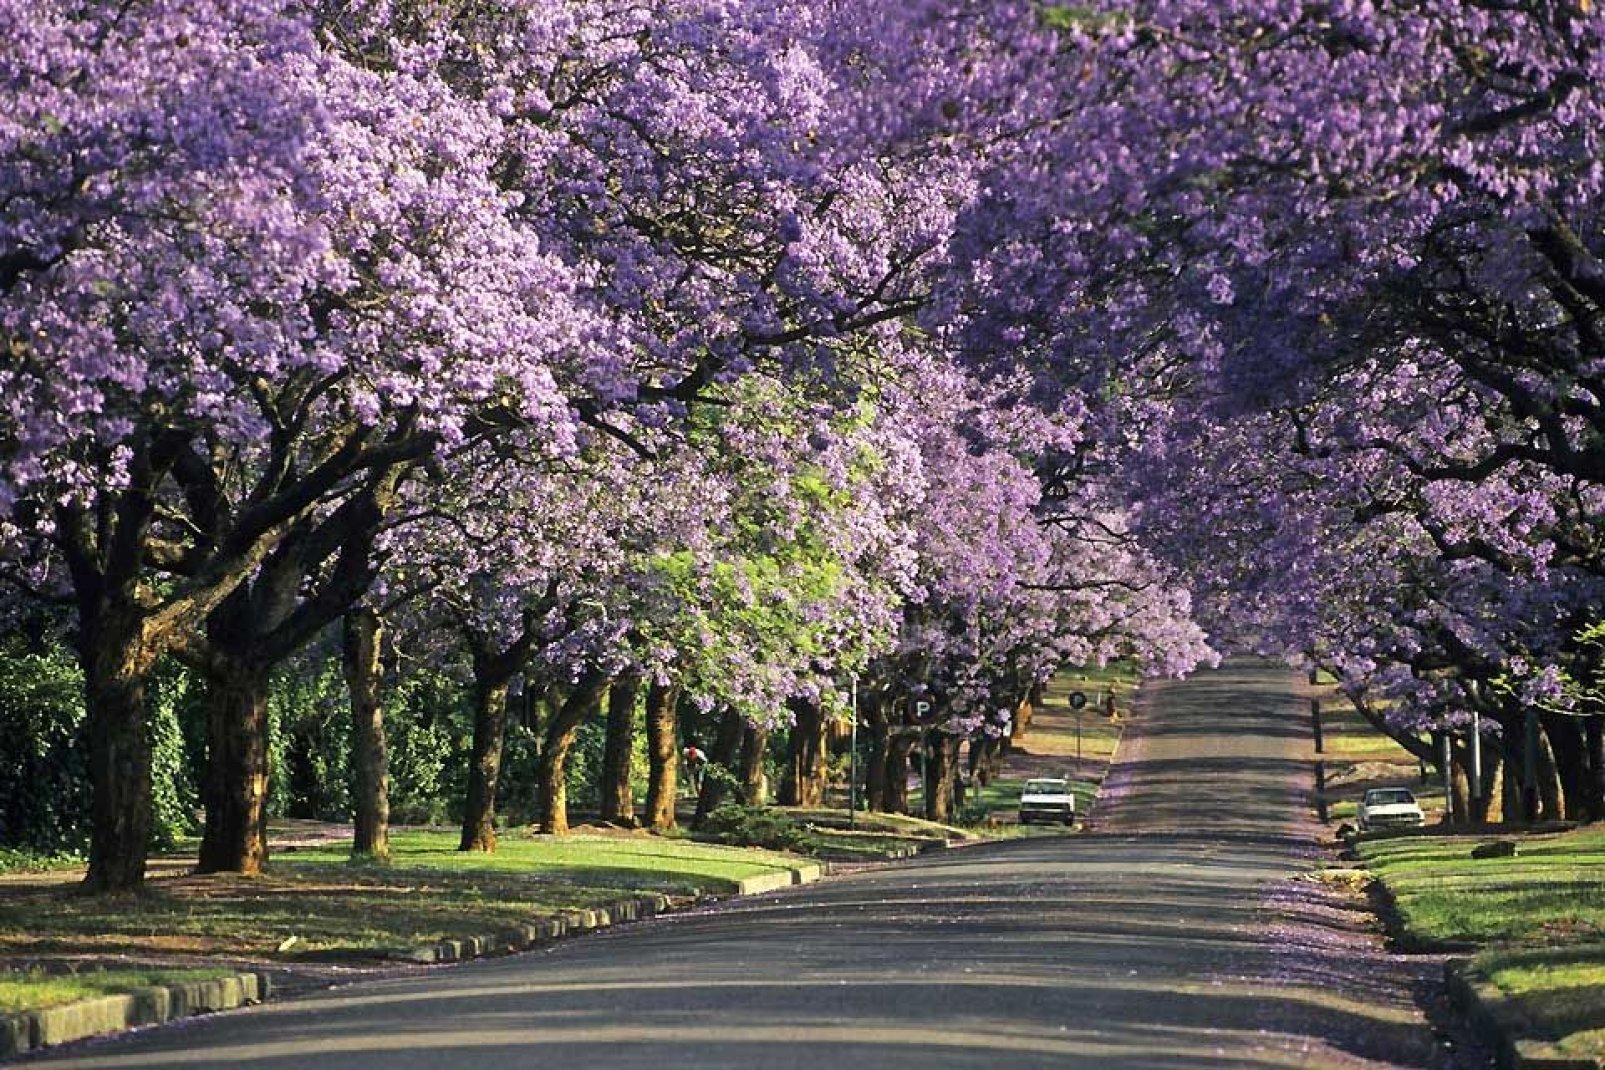 Pretoria is nicknamed Jacaranda City in reference to the springtime trees bursting with violet-coloured flowers.